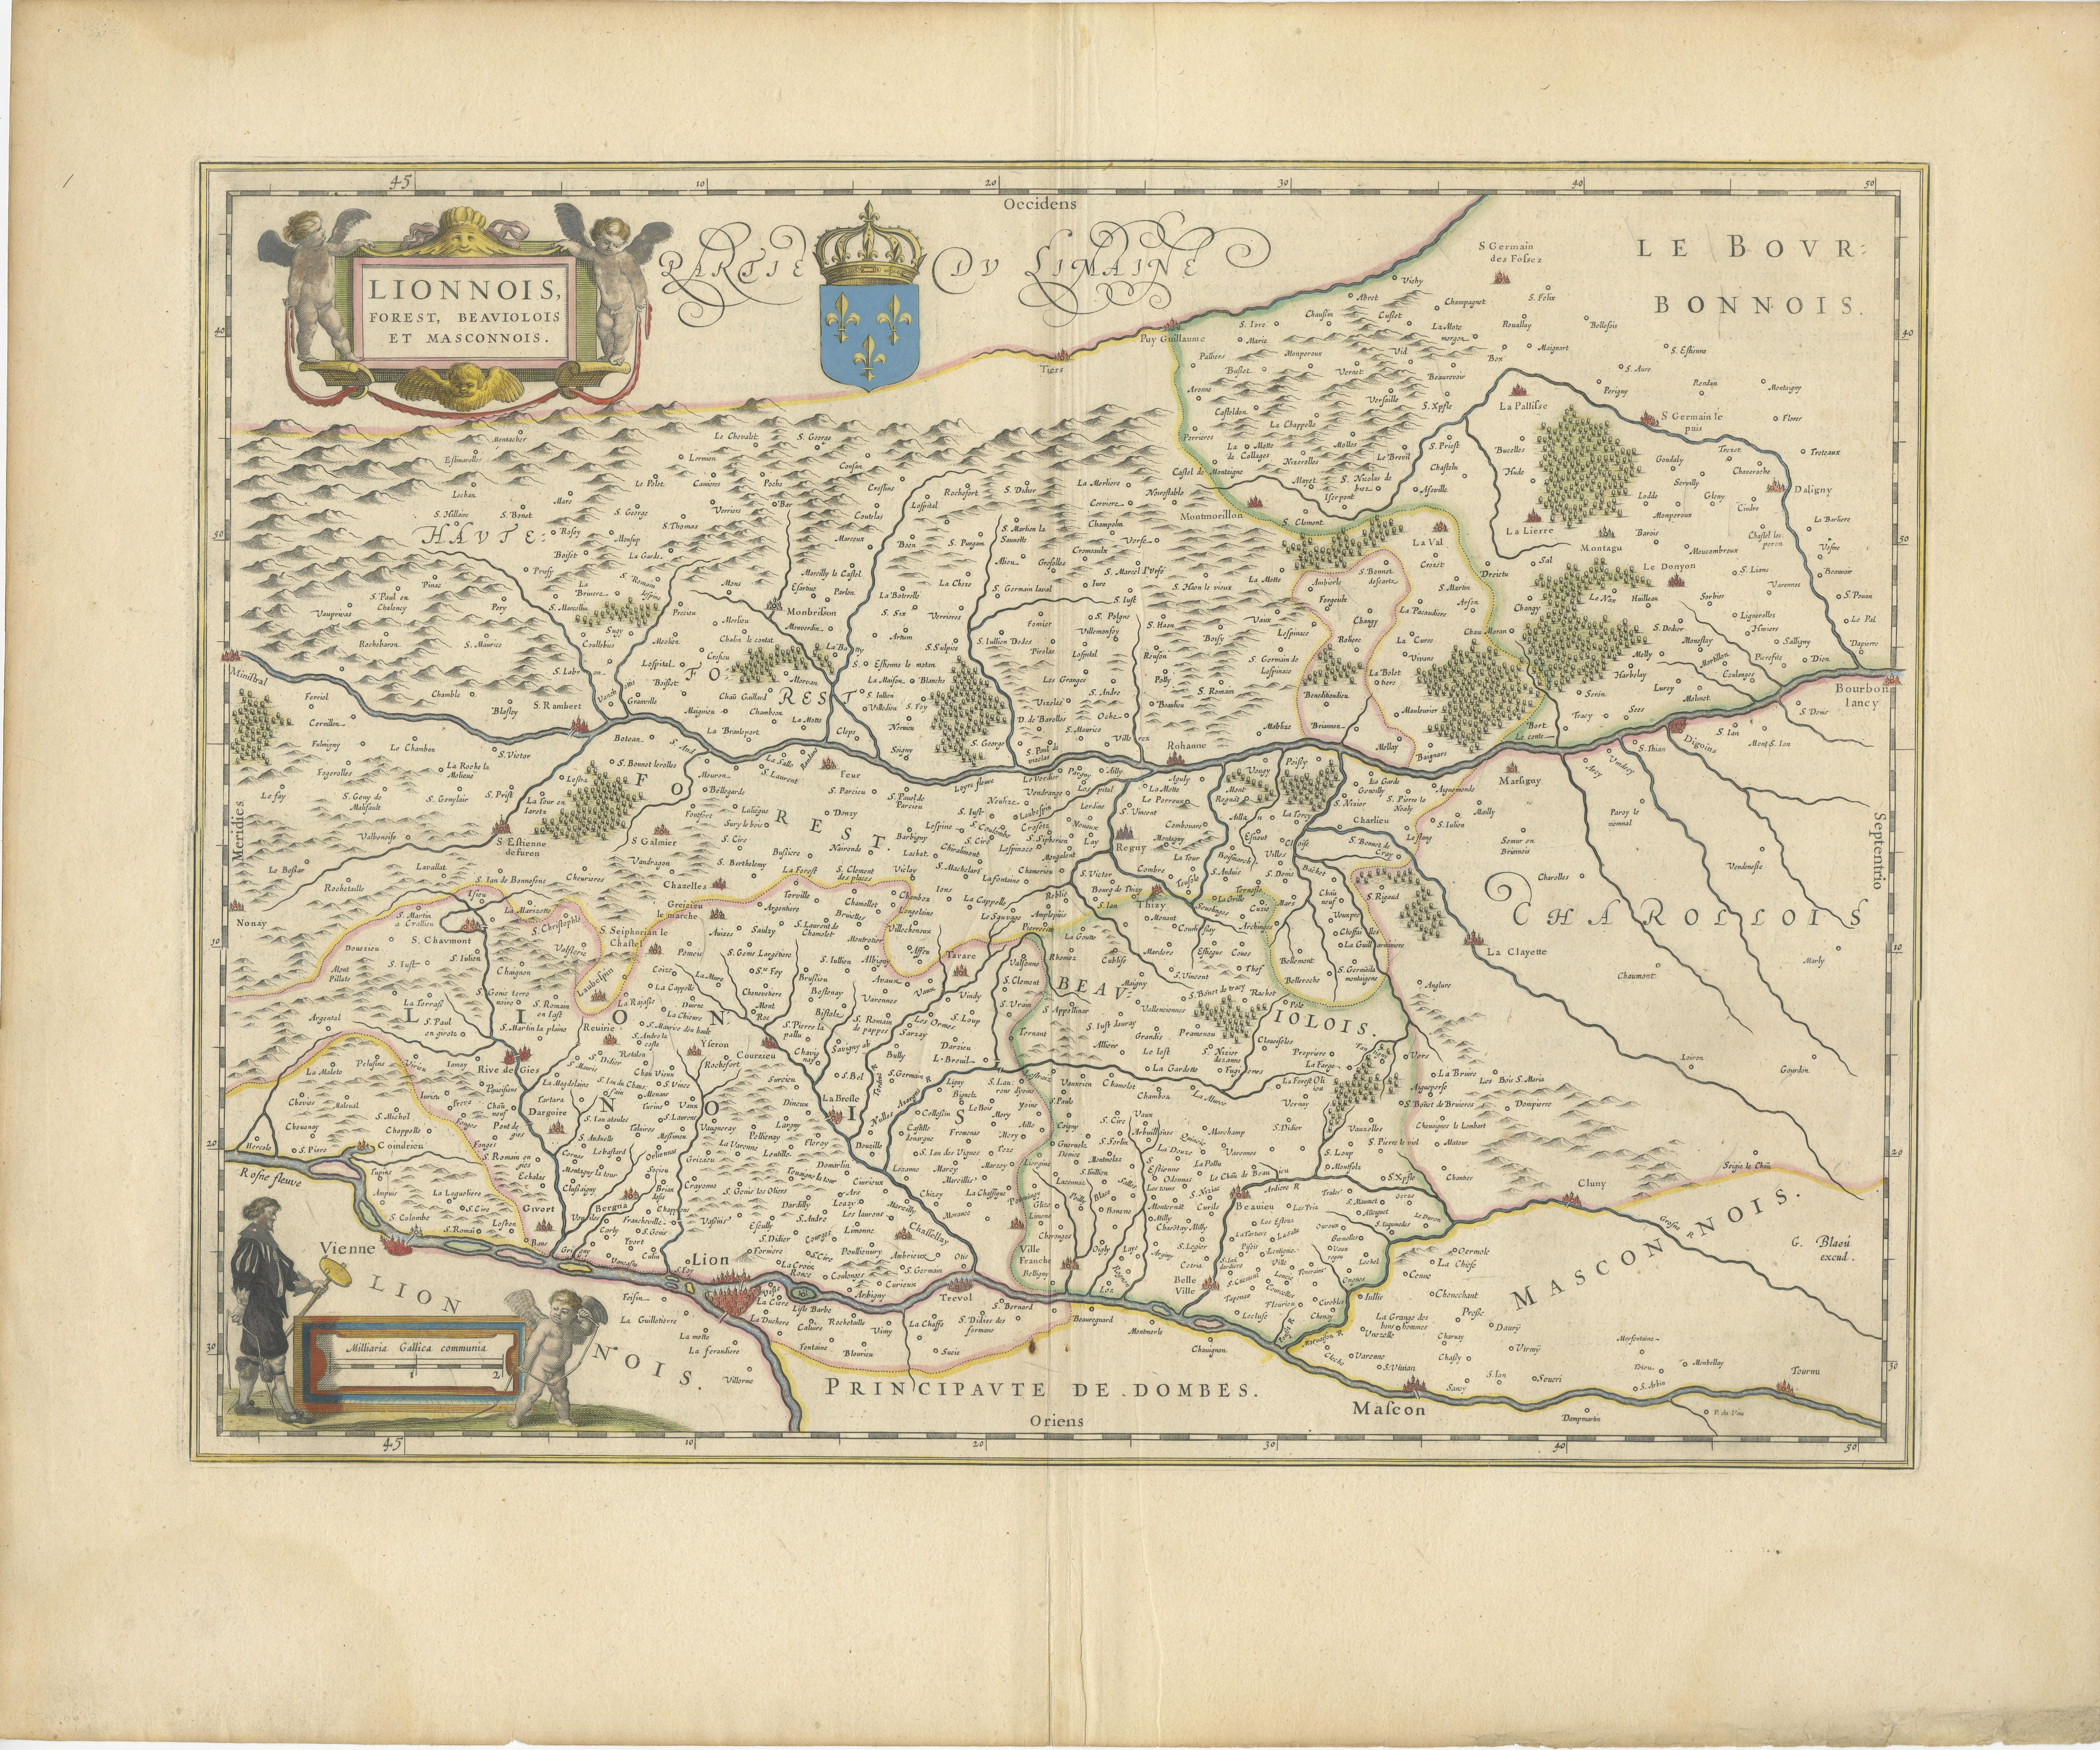 An original antique map from 1644, depicting the French provinces of Lyonnais, Beaujolais, Forez, and Mâconnais. In this map, north is oriented to the right, which is a cartographic convention not commonly used today but seen in historical maps. The